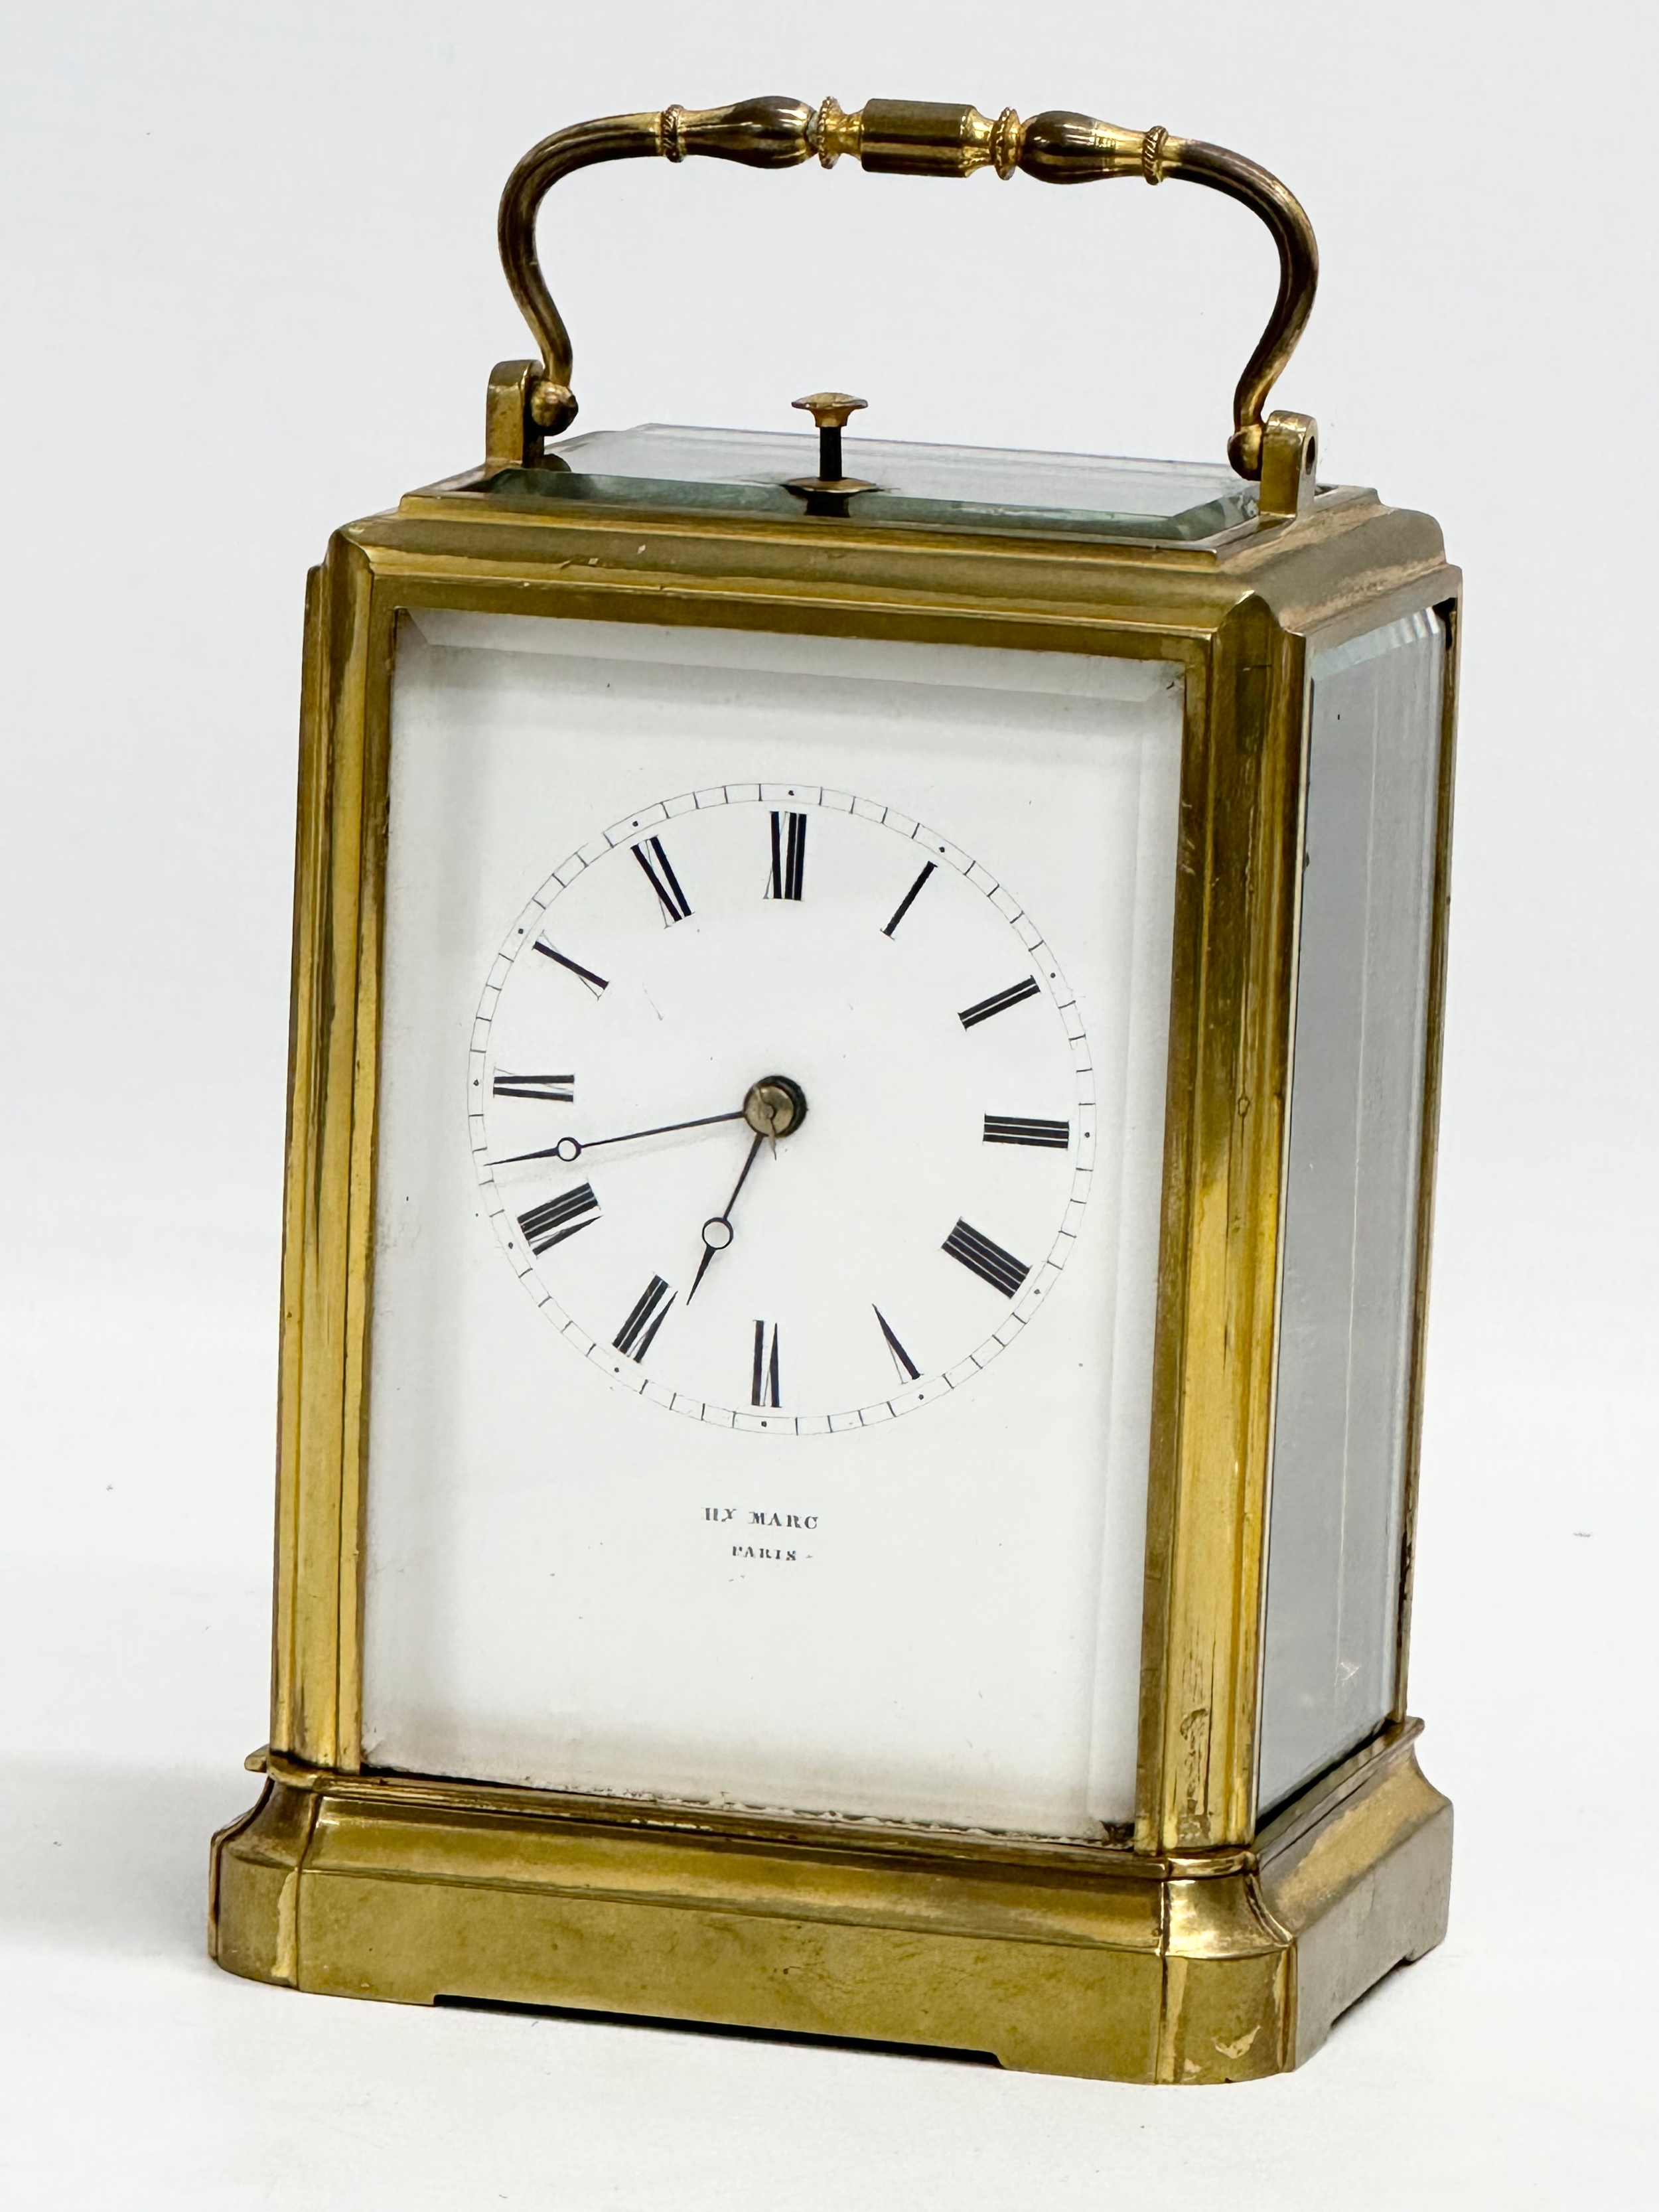 A rare mid 19th century Henry Marc brass Time Repeater Carriage Clock with 4 bevelled glass panels